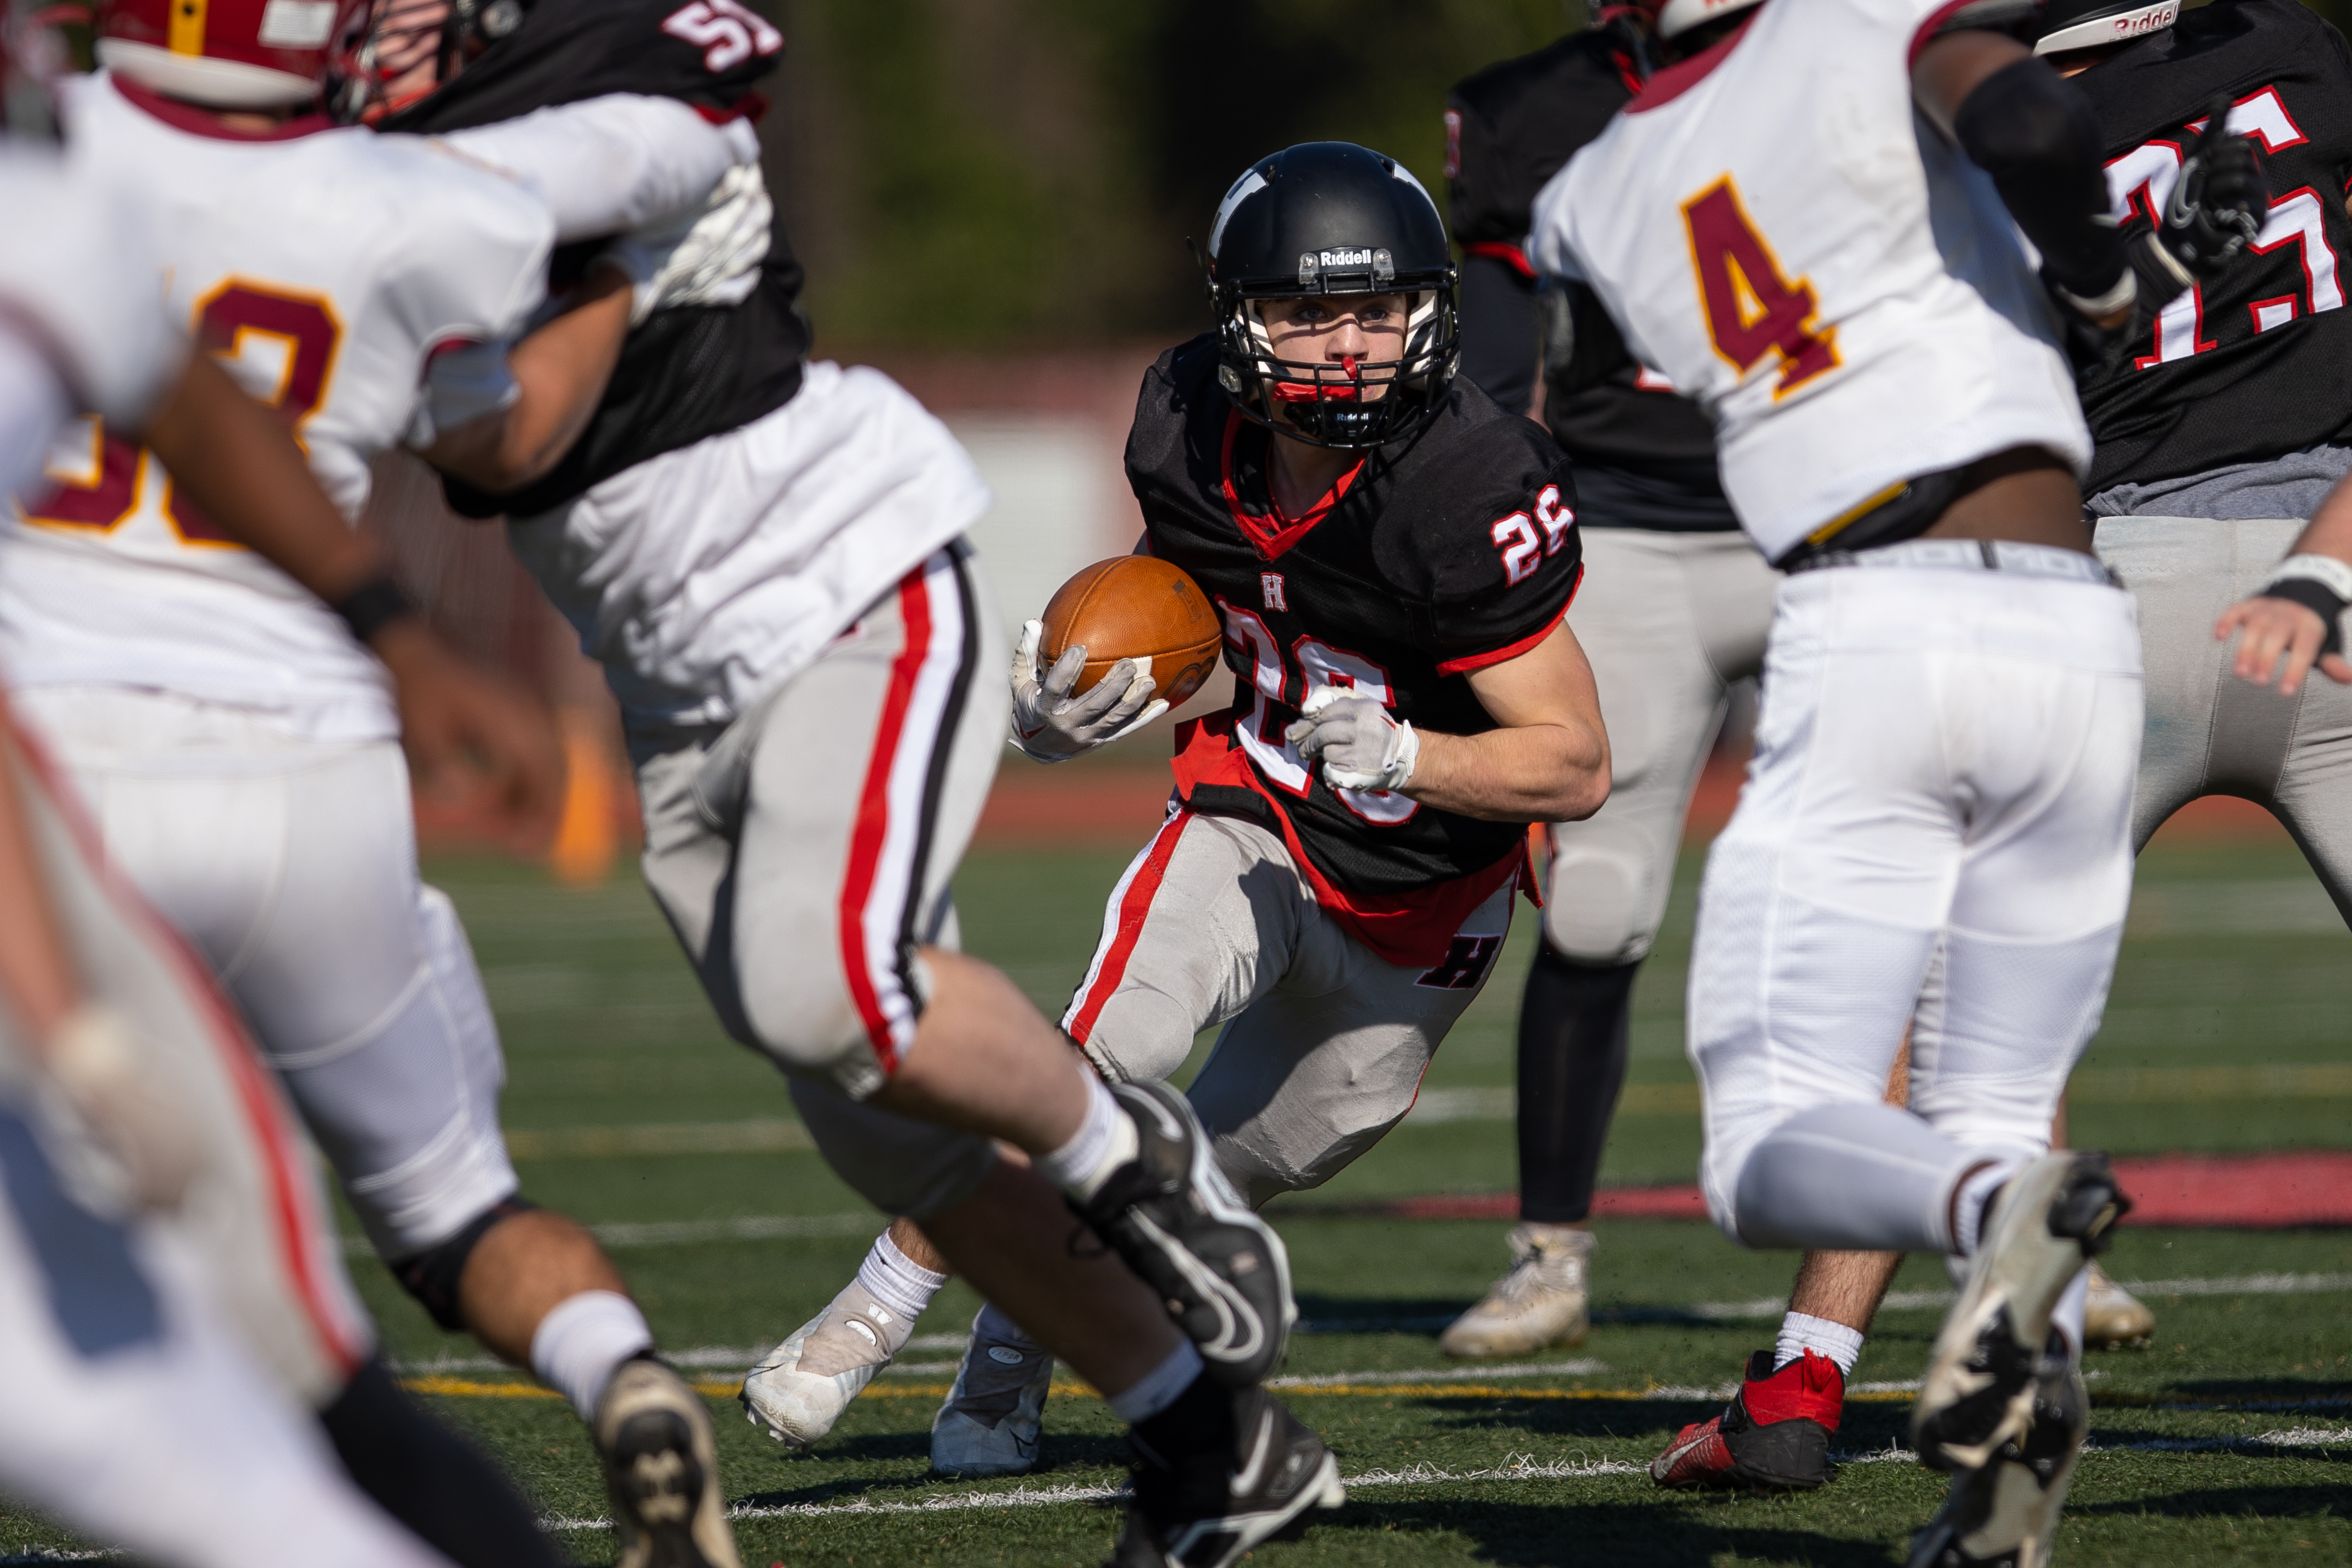 Haddonfield defeats Haddon Heights in annual Thanksgiving Day